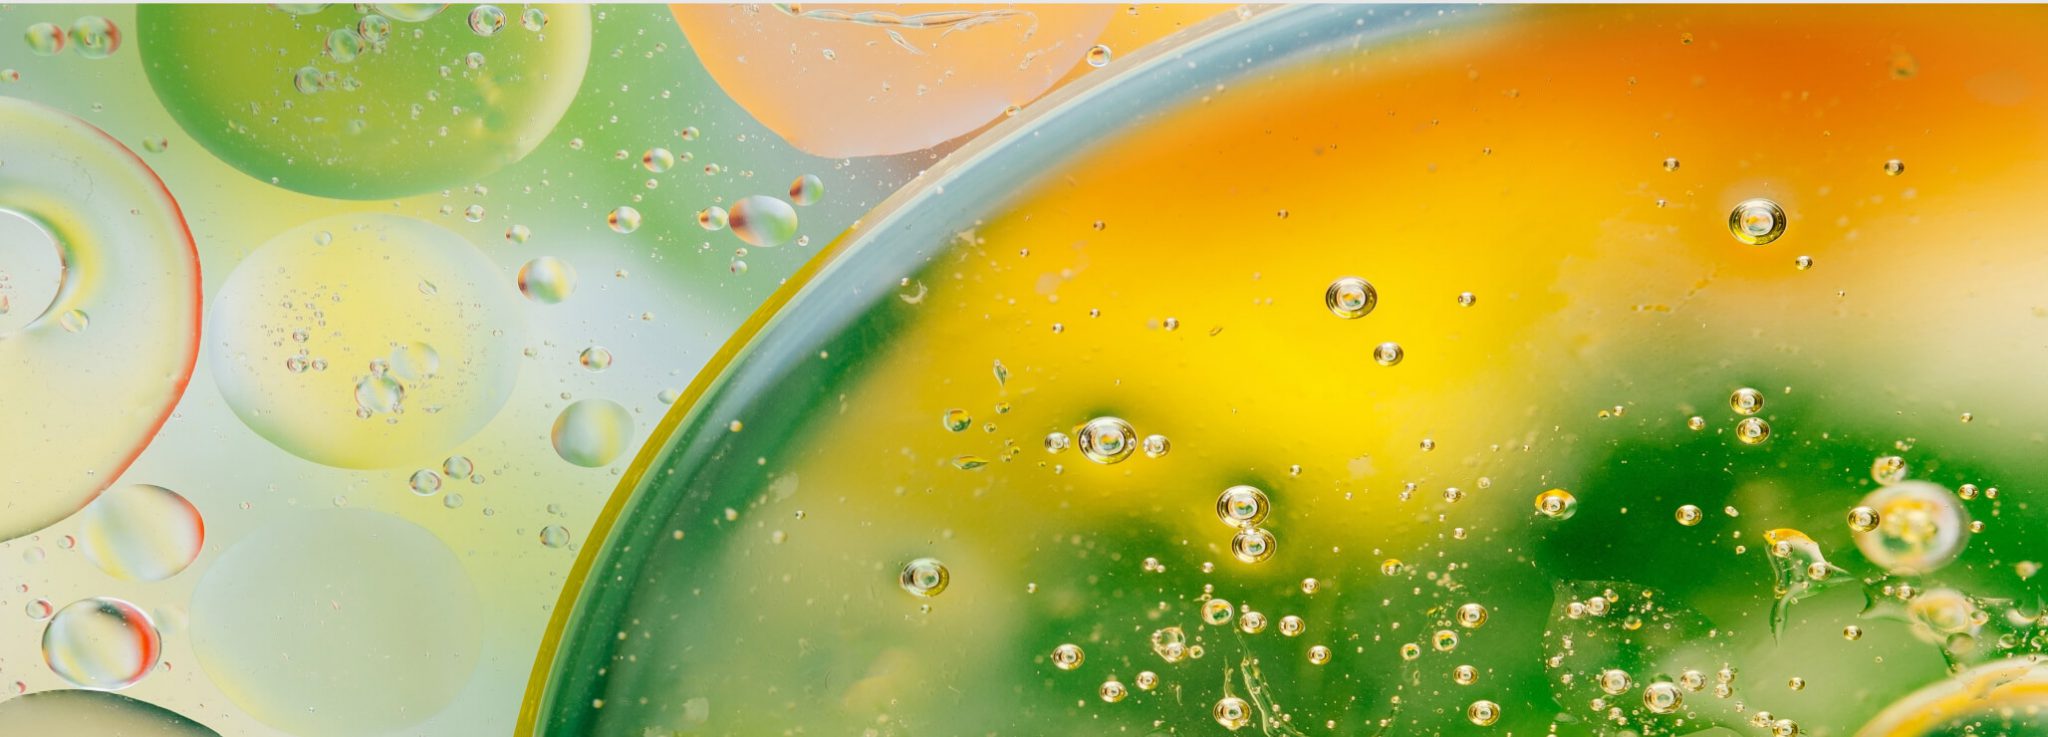 Macro photo of green and yellow liquid droplets combining together